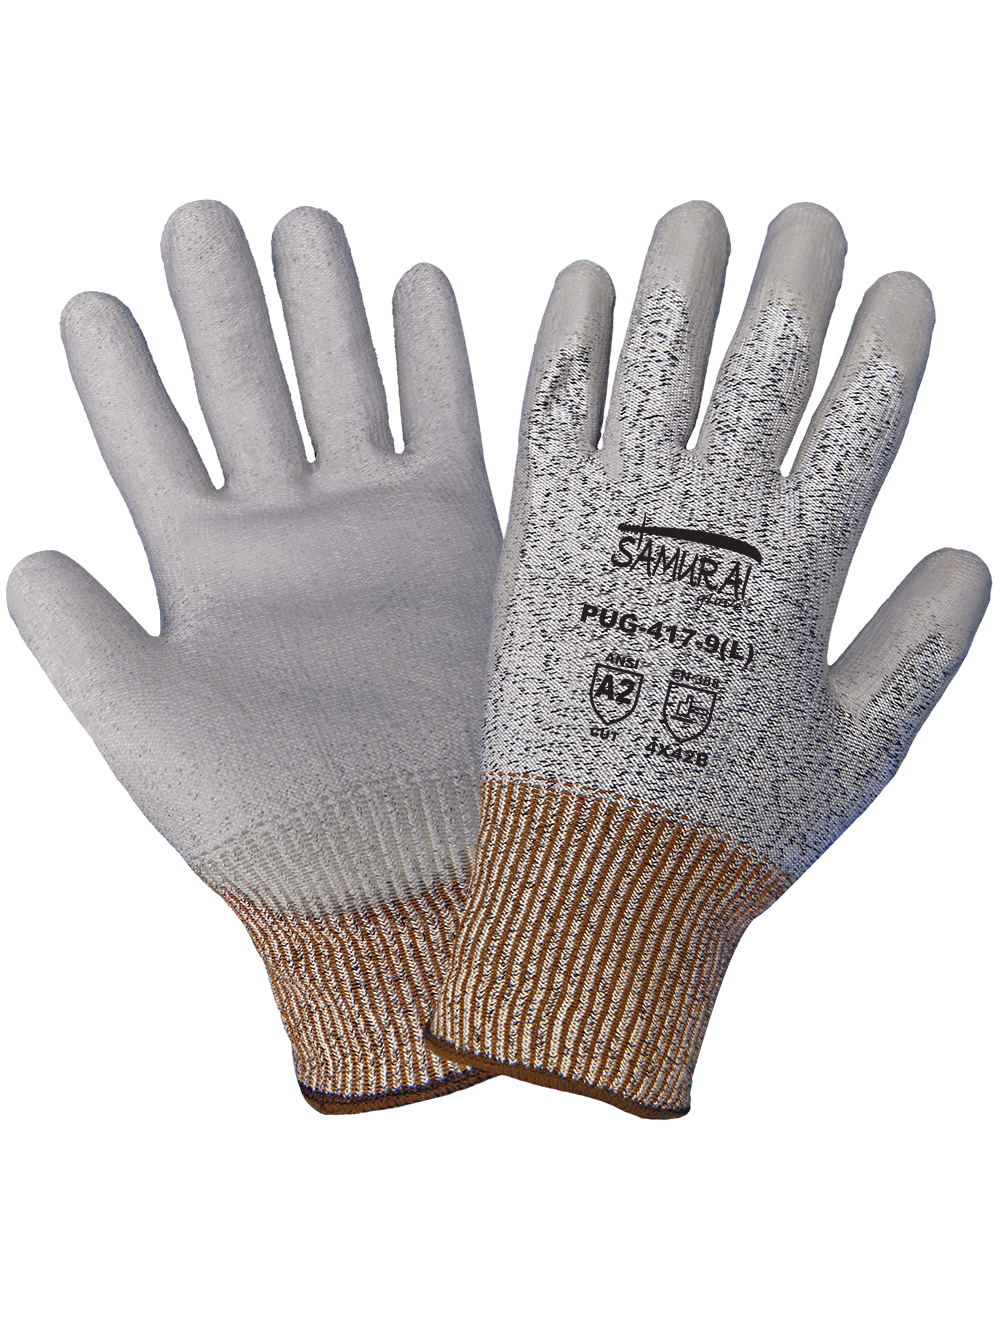 Glove Samurai Resistant Tuffalene® Polyurethane-Coated Abrasion, Heat Protection, Cut, Safety Global Protection - Protection, UHMWPE and Cut Stress, Hand Glove® Protection, Gloves Cooling Eye Puncture and Resistant PUG-417